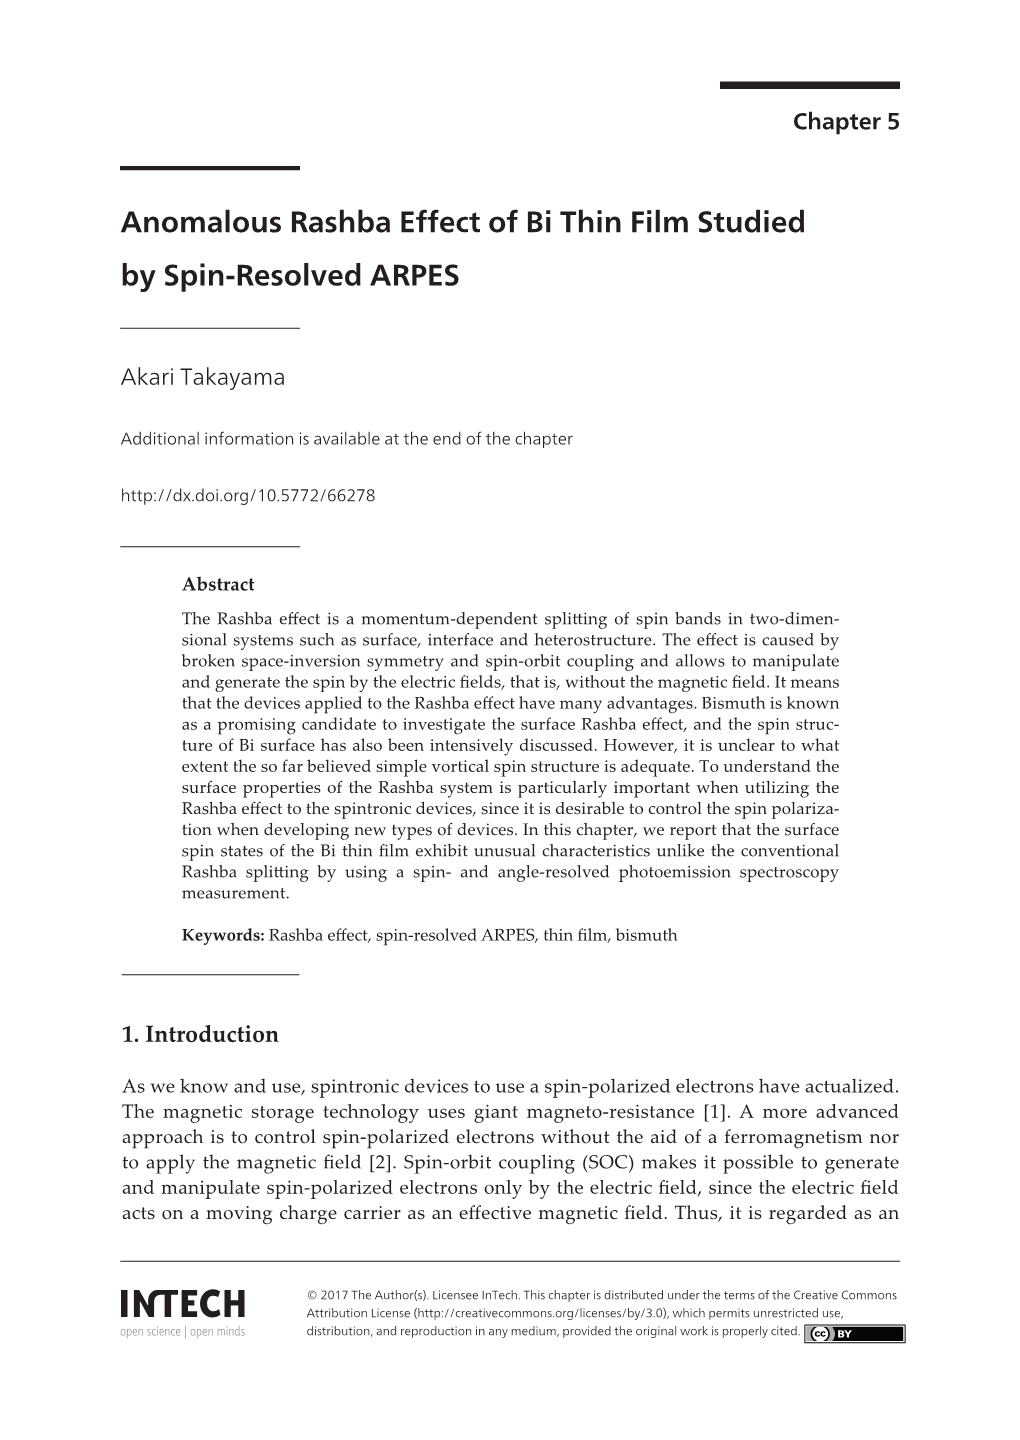 Anomalous Rashba Effect of Bi Thin Film Studied by Spin-Resolved ARPES 79 Applicable to Advanced Spintronic Devices [2, 5, 6]